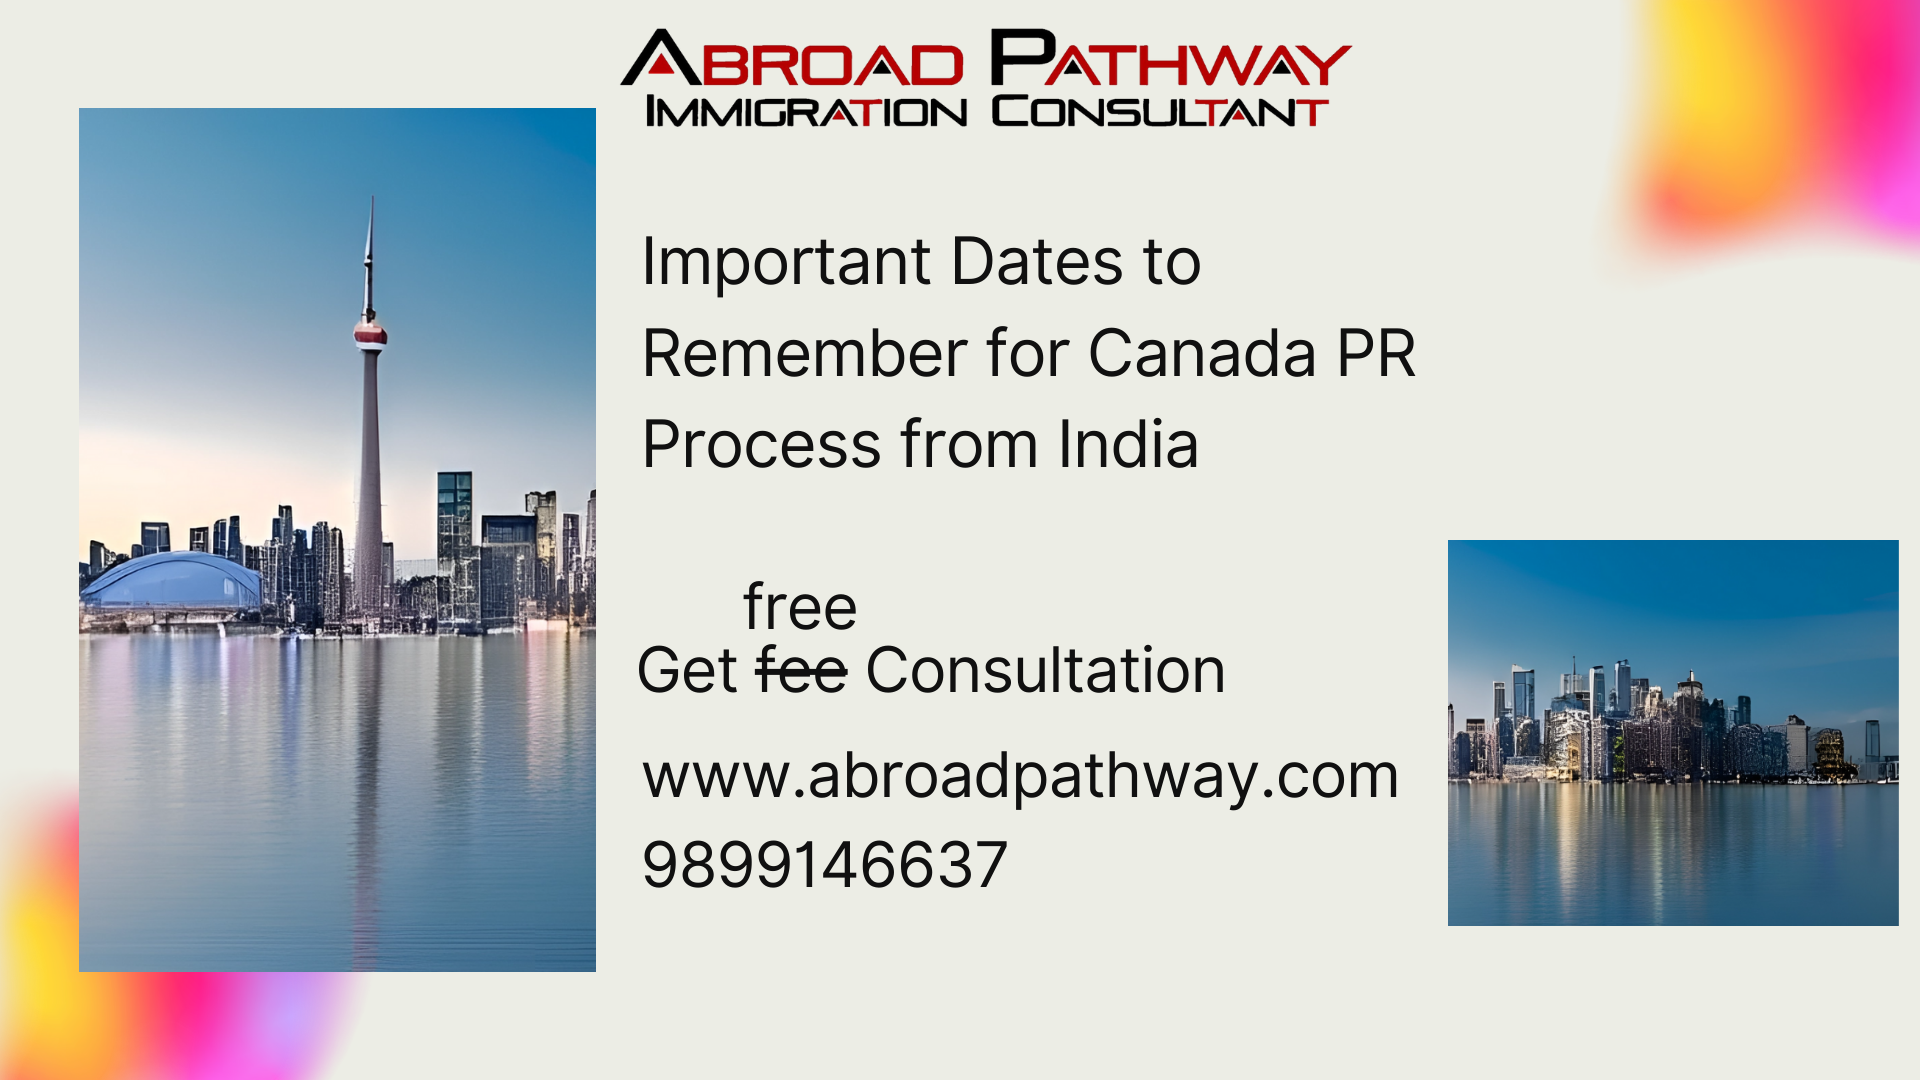  Important Dates to Remember for Canada PR Process from India